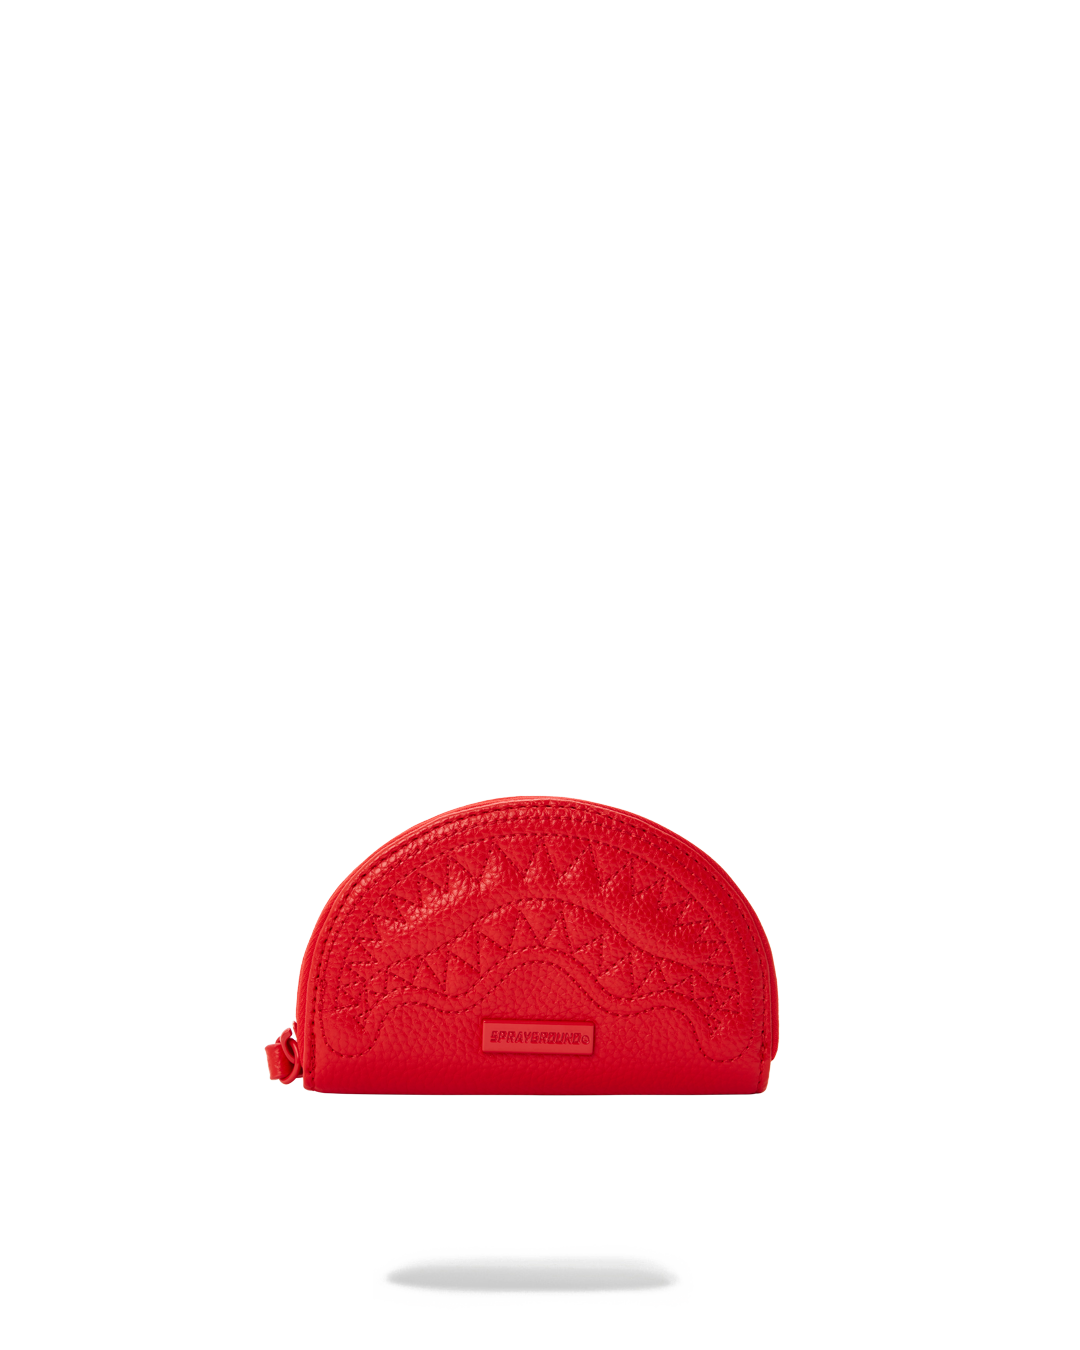 RED RIVIERA SHARK COIN POUCH